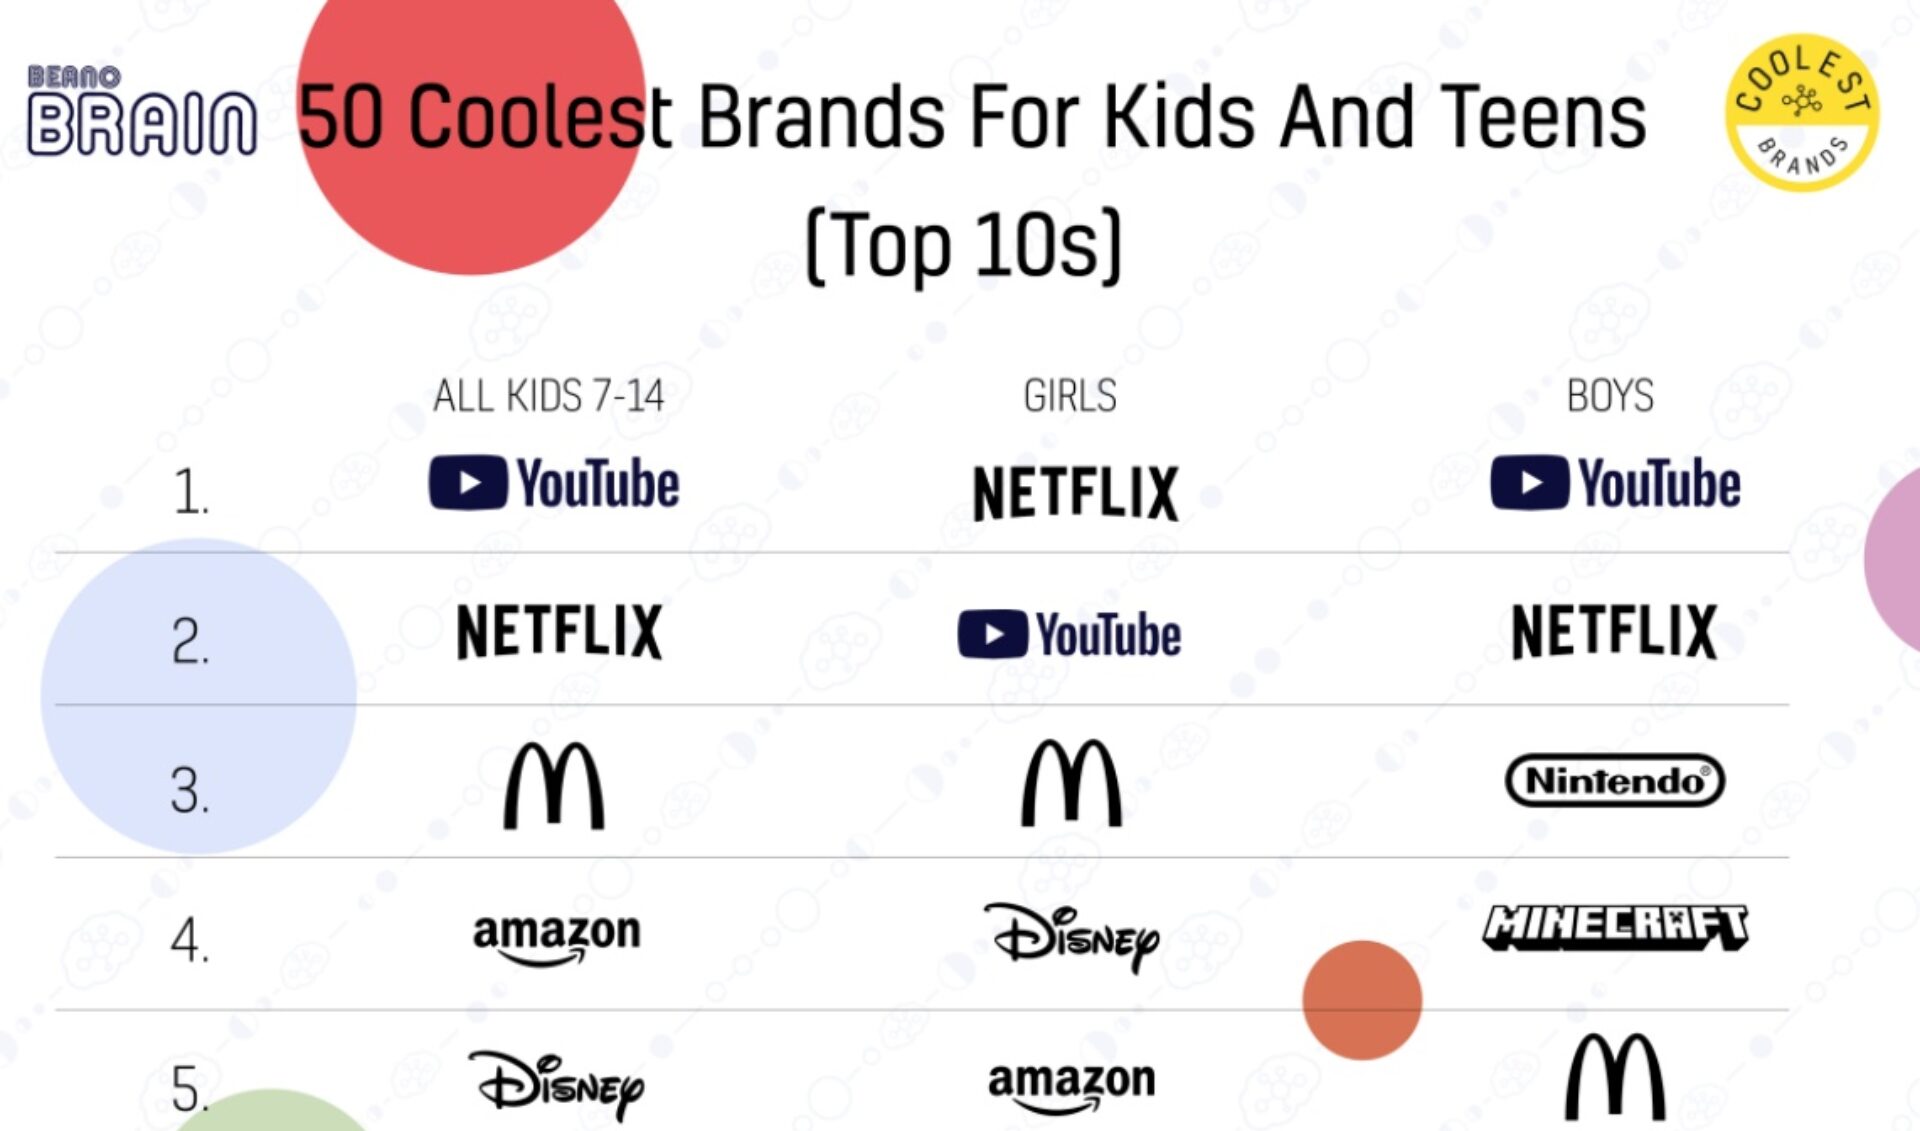 Diktatur bjærgning På jorden Generation Alpha is a thing. And it chooses YouTube and Netflix as the  “coolest brands”. - Tubefilter